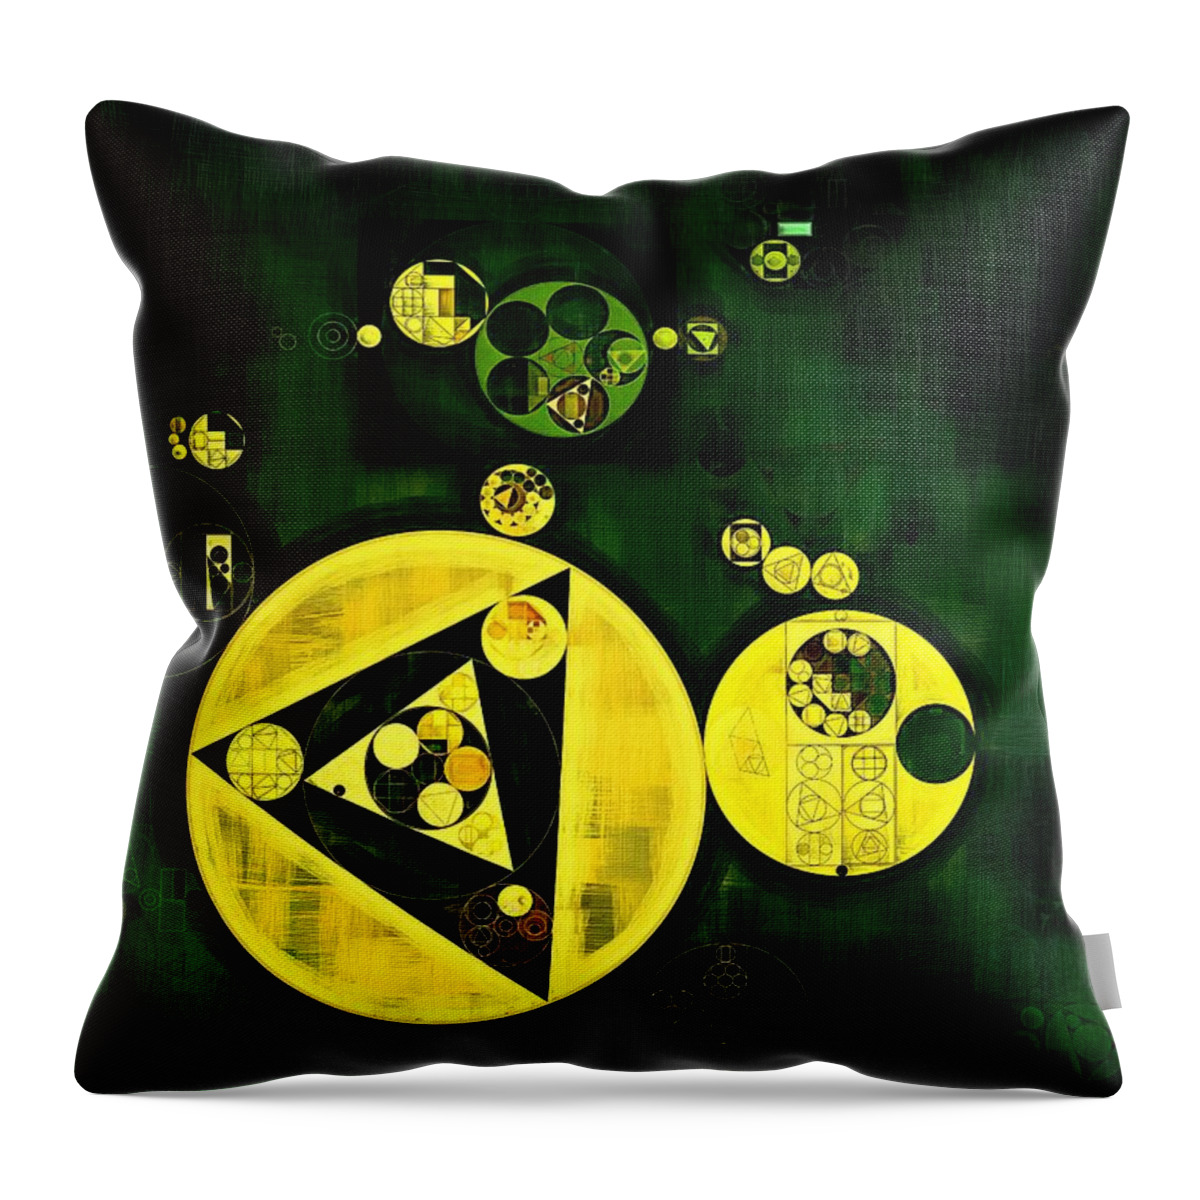 Abstract Painting Throw Pillow featuring the digital art Abstract painting - Phthalo green #1 by Vitaliy Gladkiy